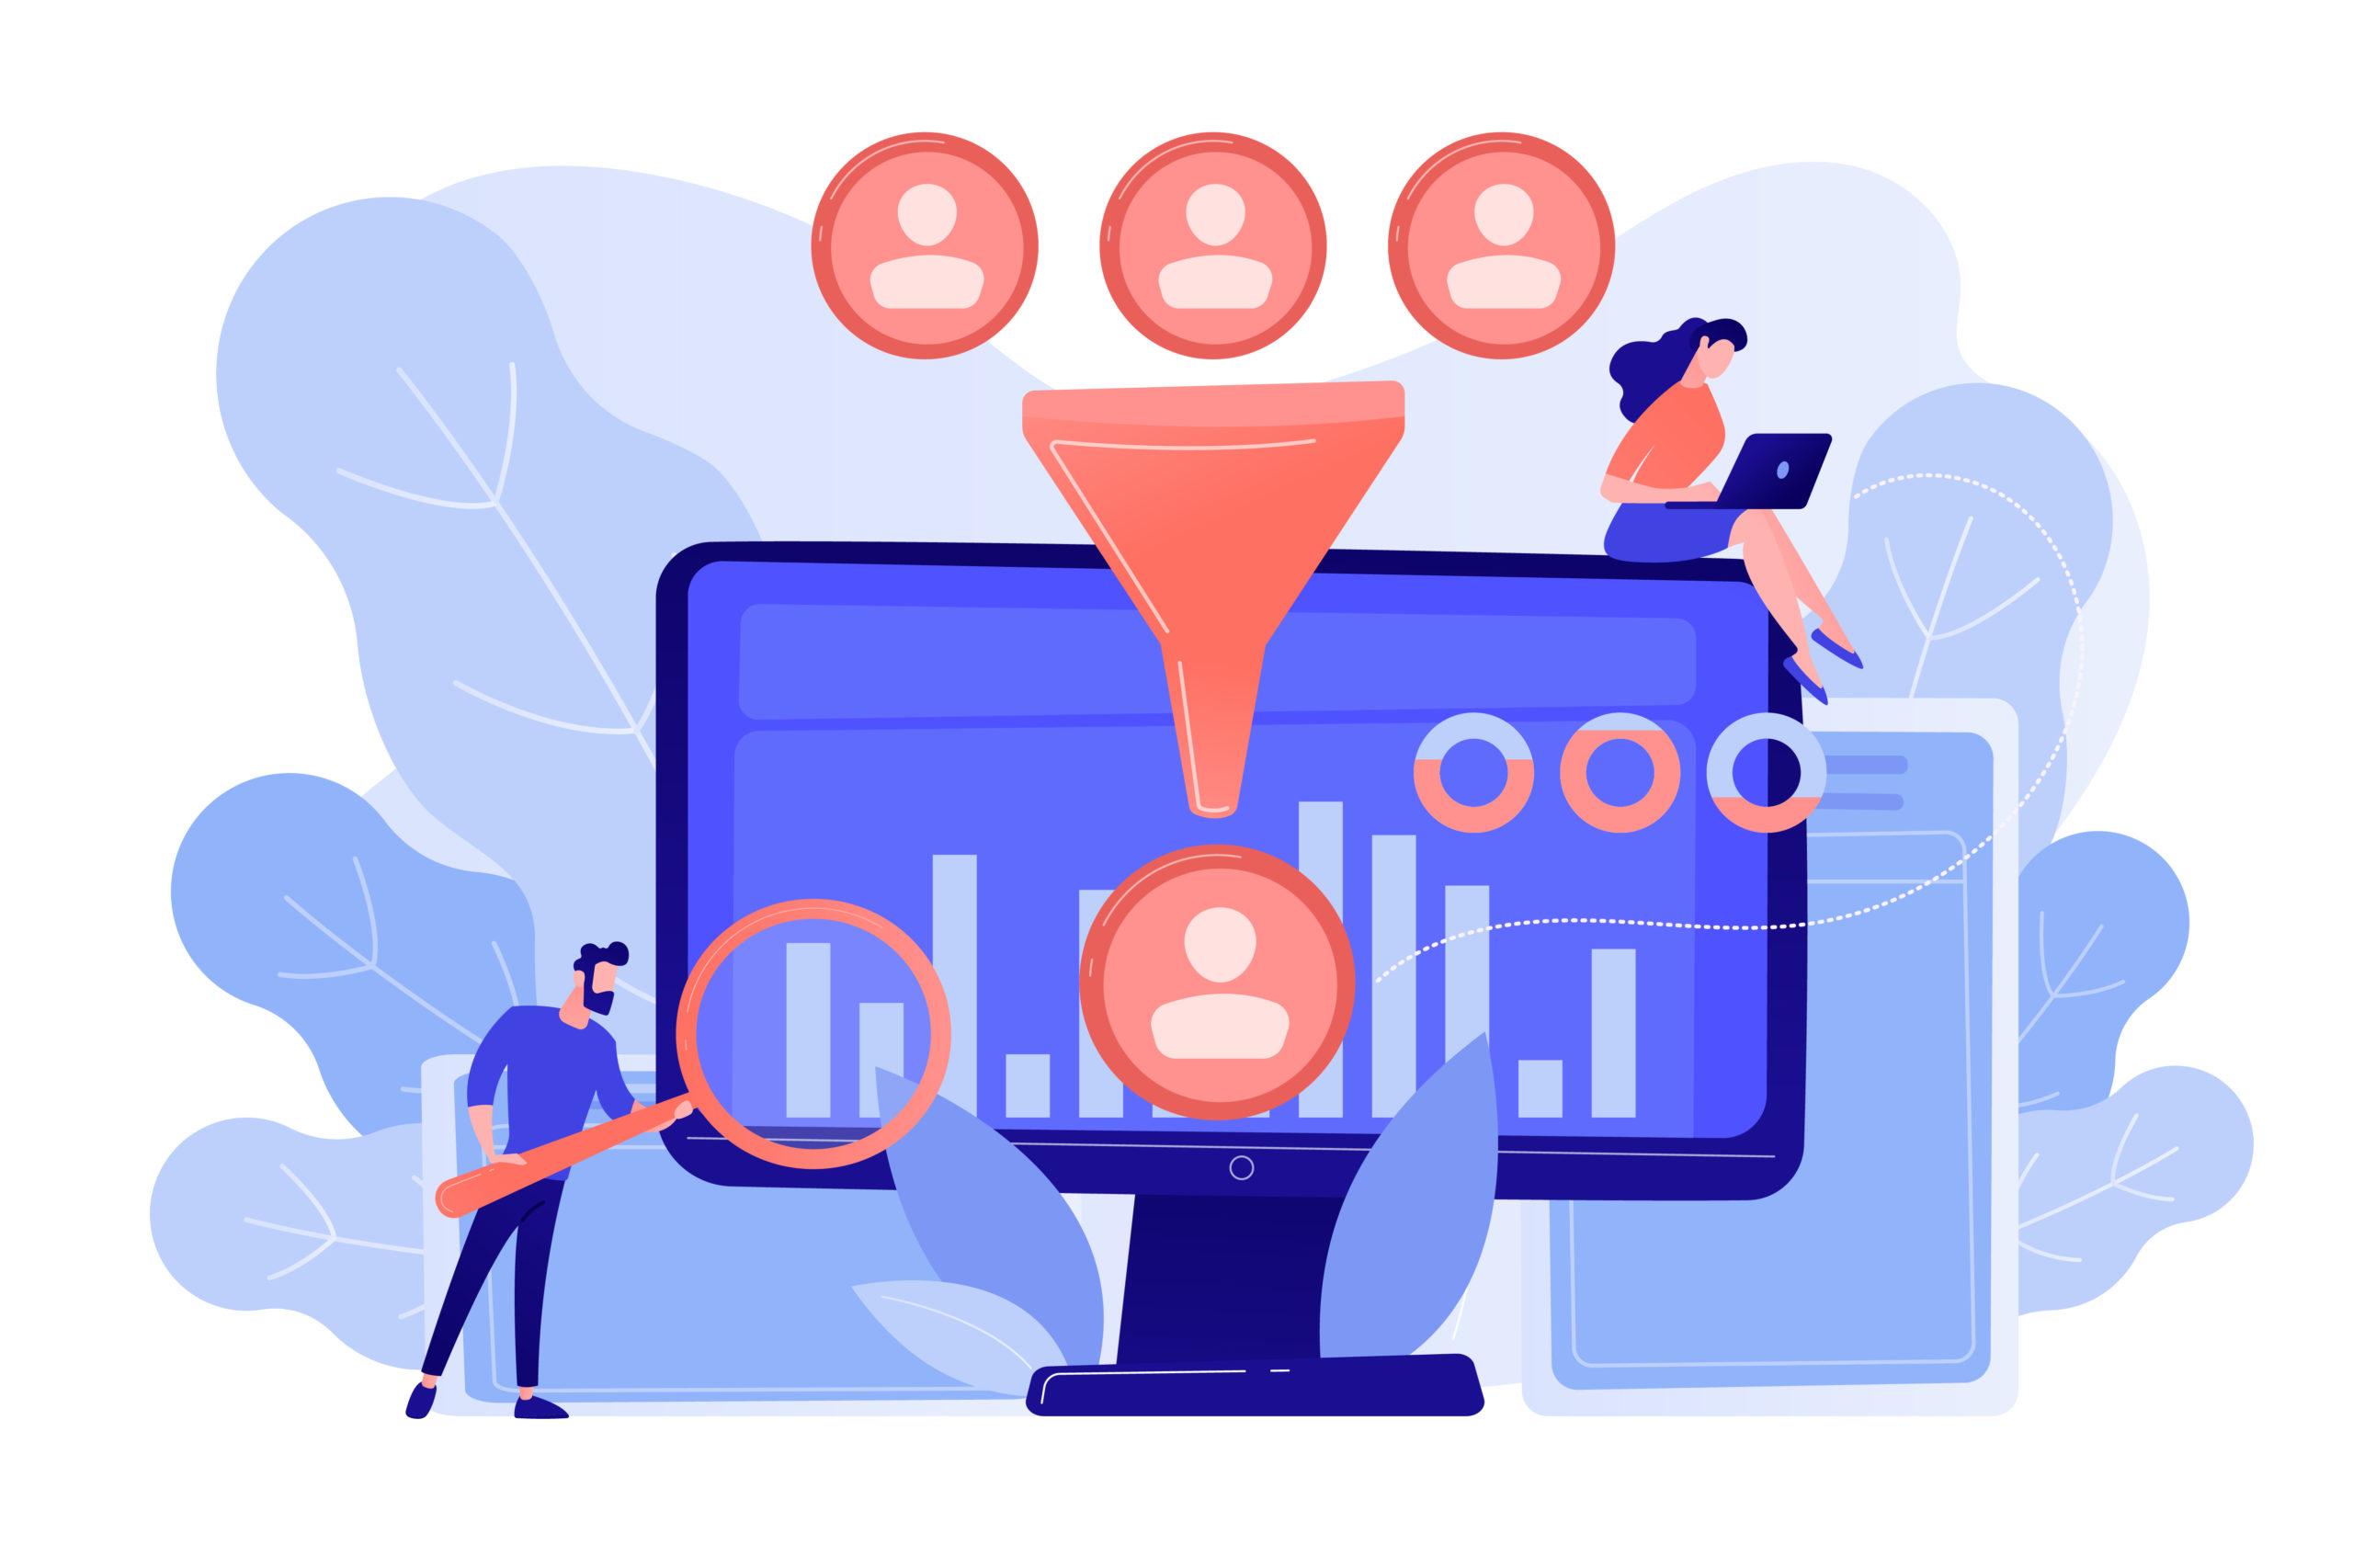 Data Scientist And Specialist Extract Knowledge And Insights From Data. Data Science Analytics, Machine Learning Control, Big Data Analytics Concept. Pinkish Coral Bluevector Isolated Illustration